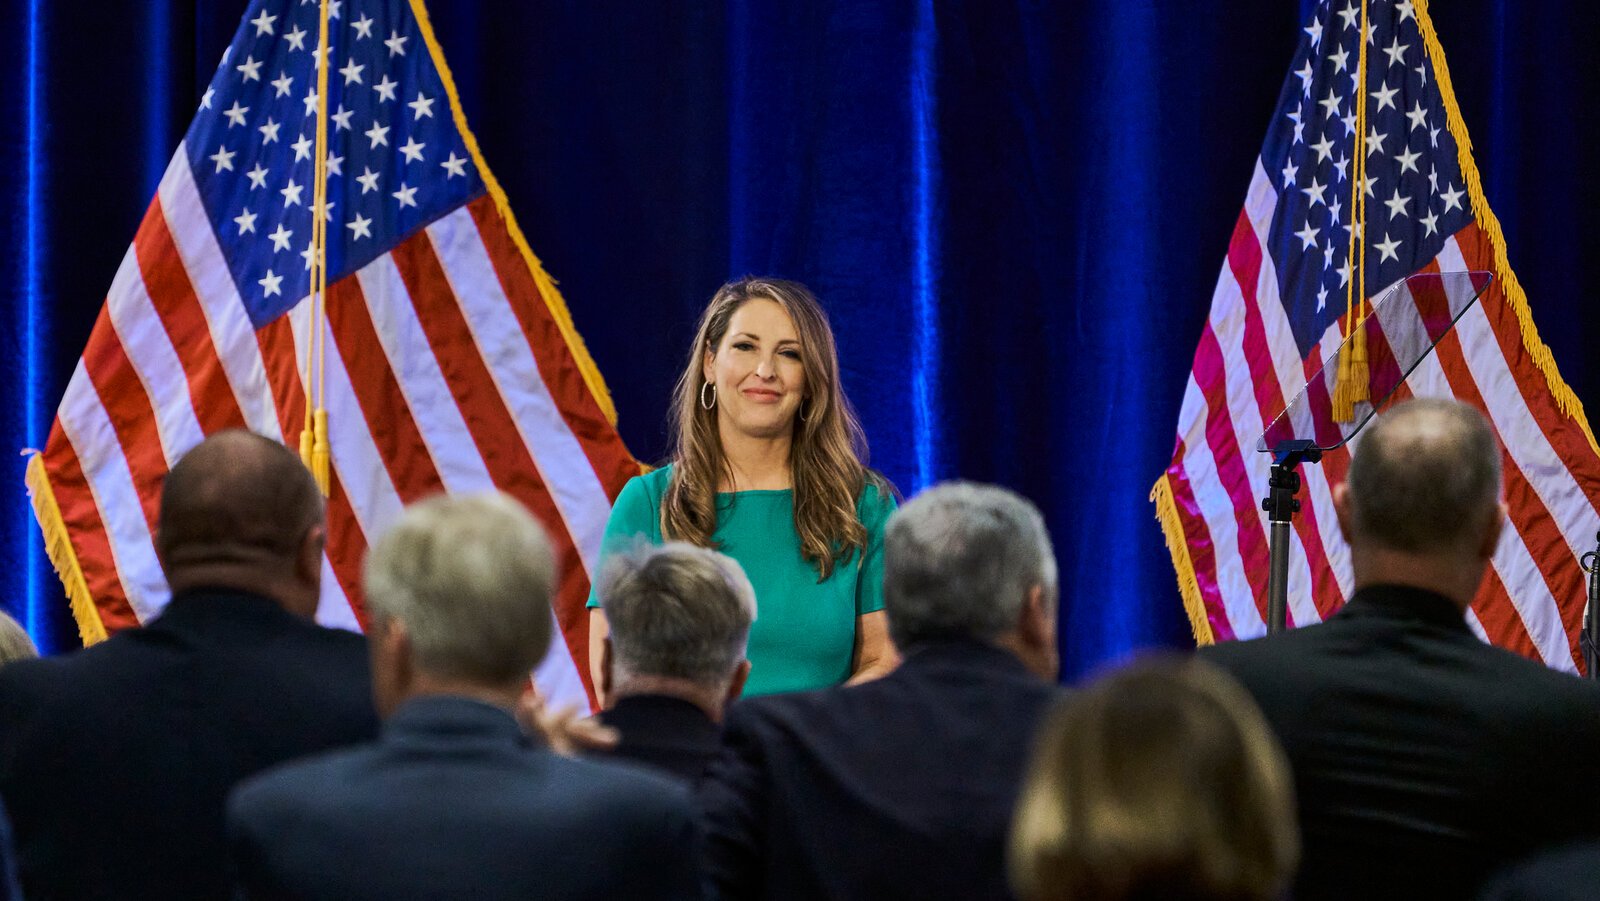 Ronna McDaniel resigns as GOP leader amidst pressure from Donald Trump (Credits: The NY Times)